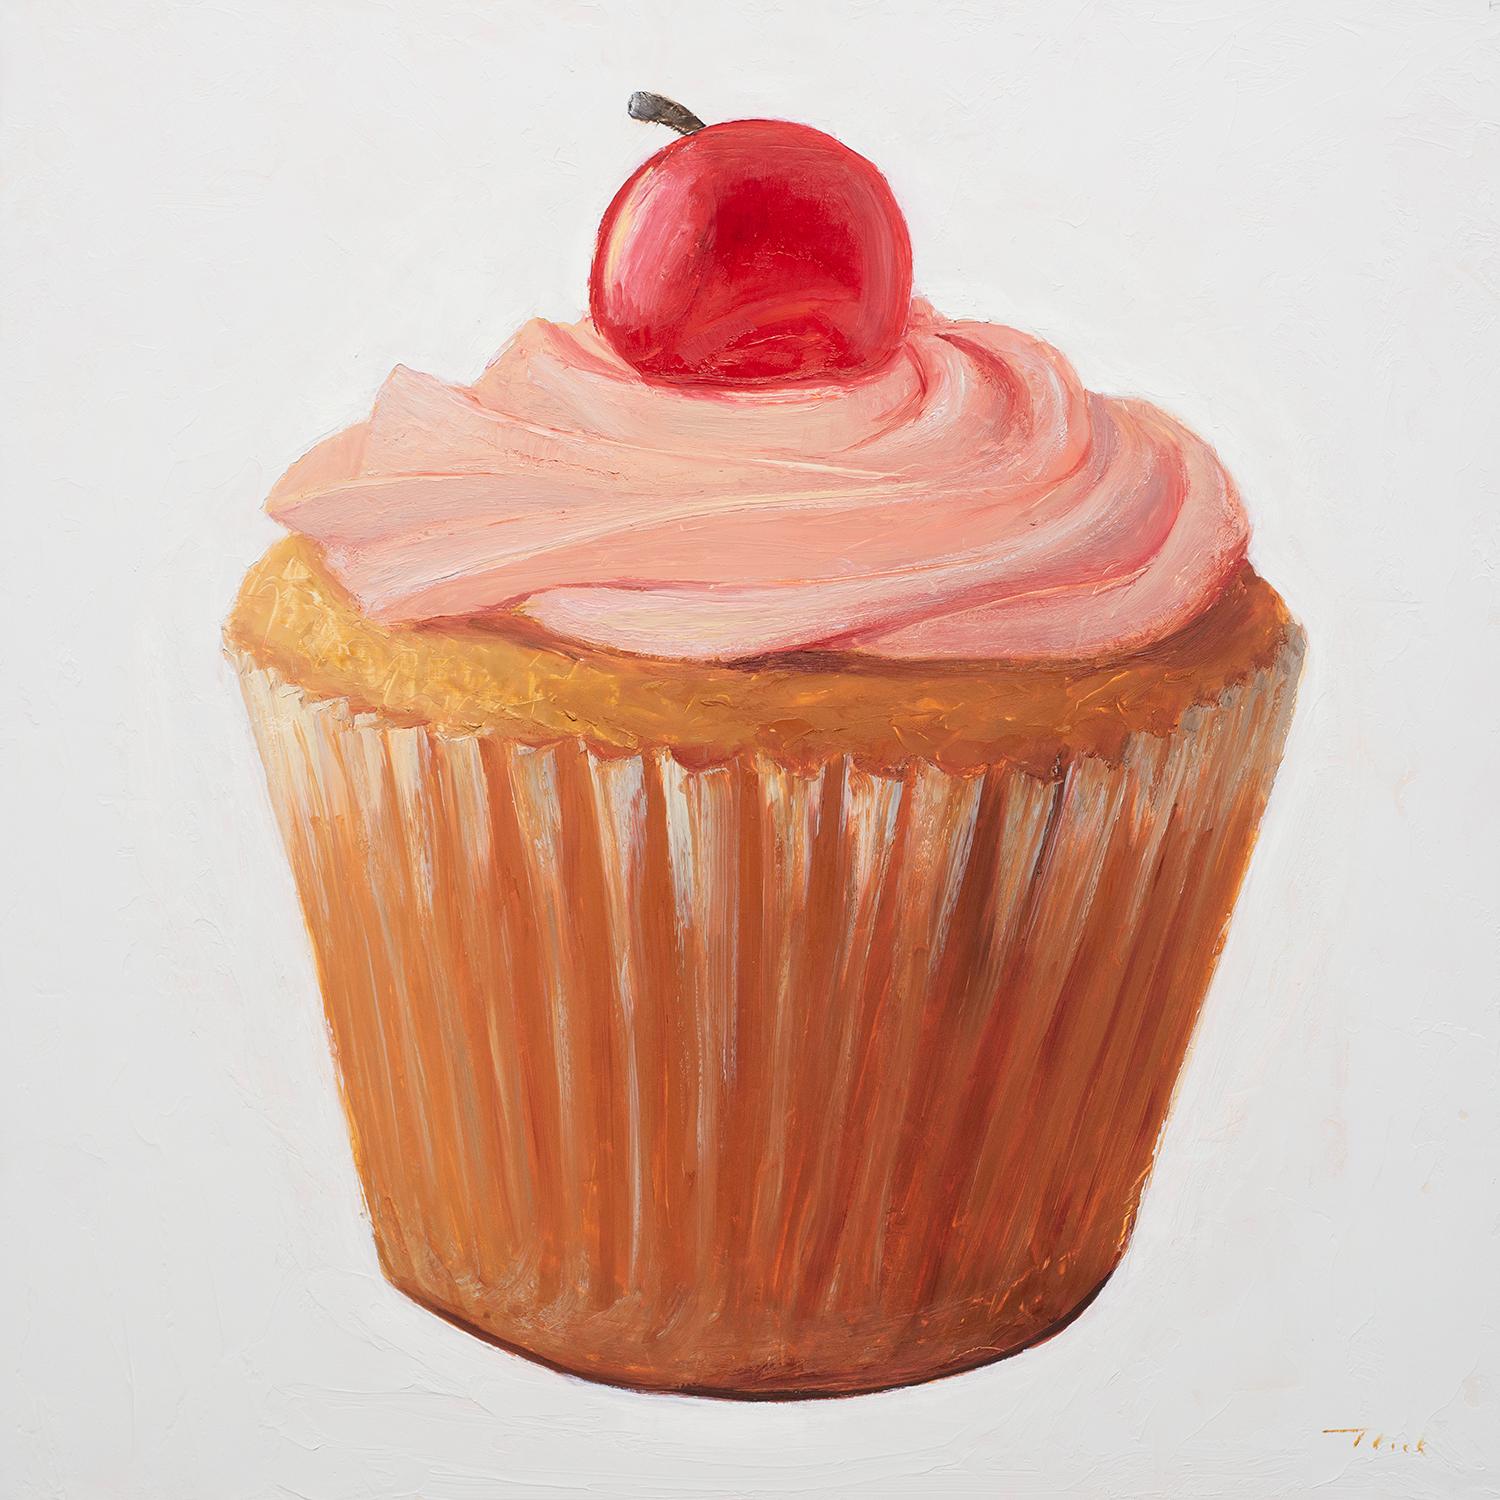 Cherry on Top, Oil Painting - Art by McGarren Flack